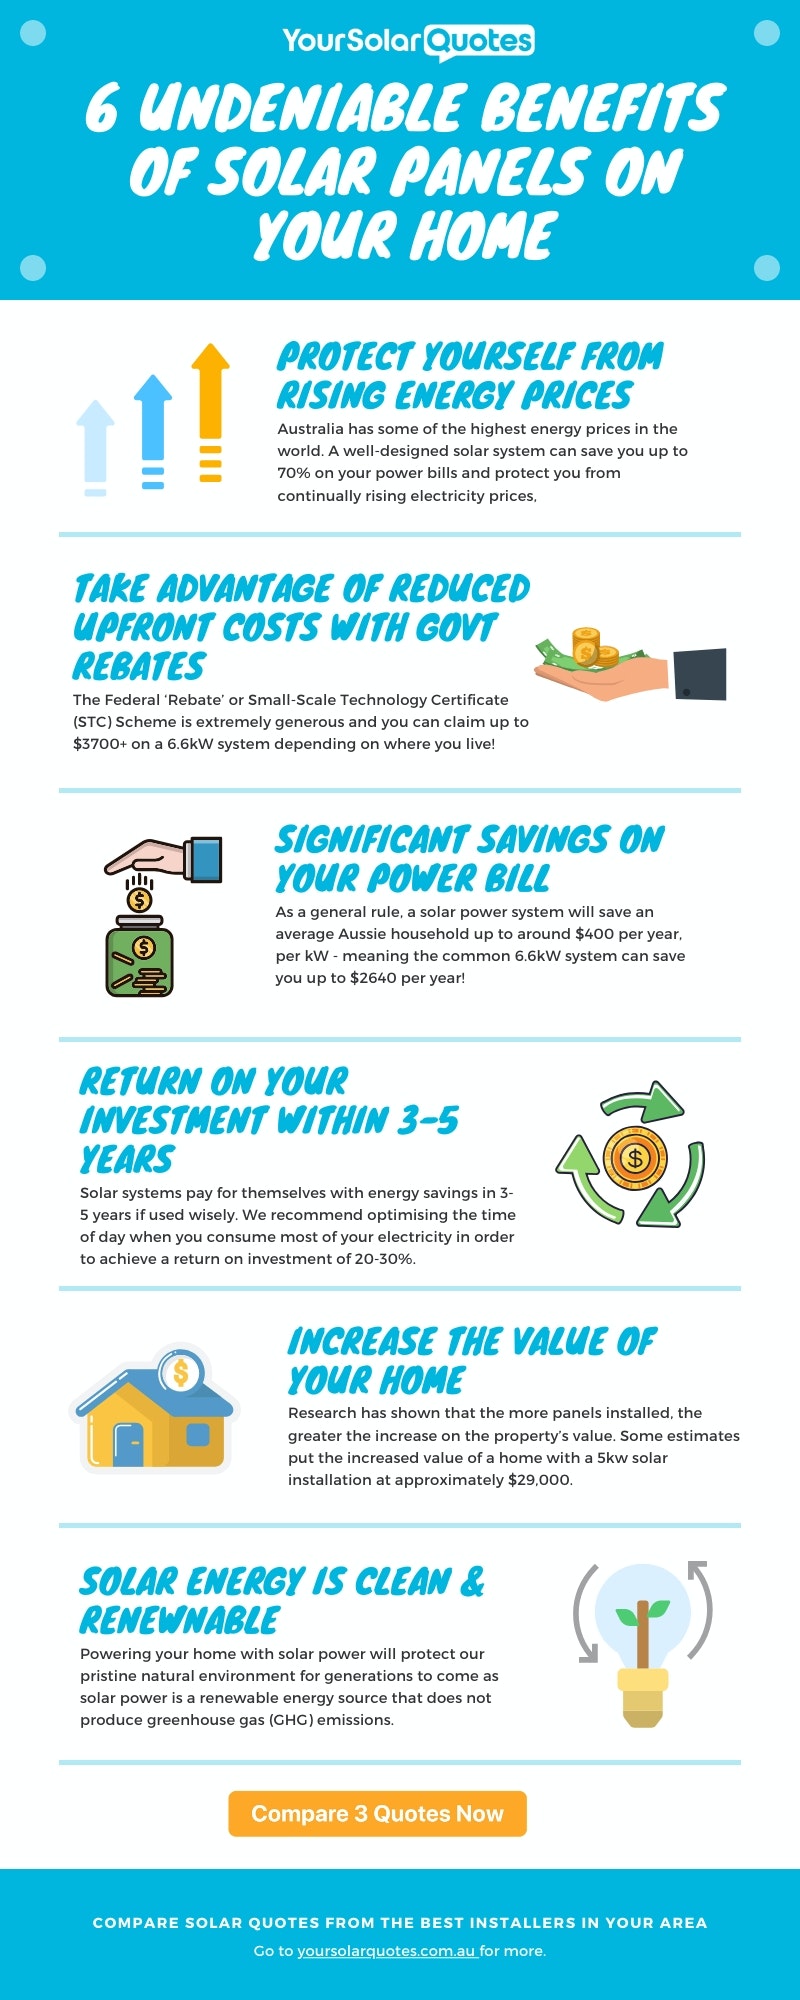 benefits of solar panels infographic reasons are avoiding power increase, savings, rebates, return on investment, increase value of home, good for environment 